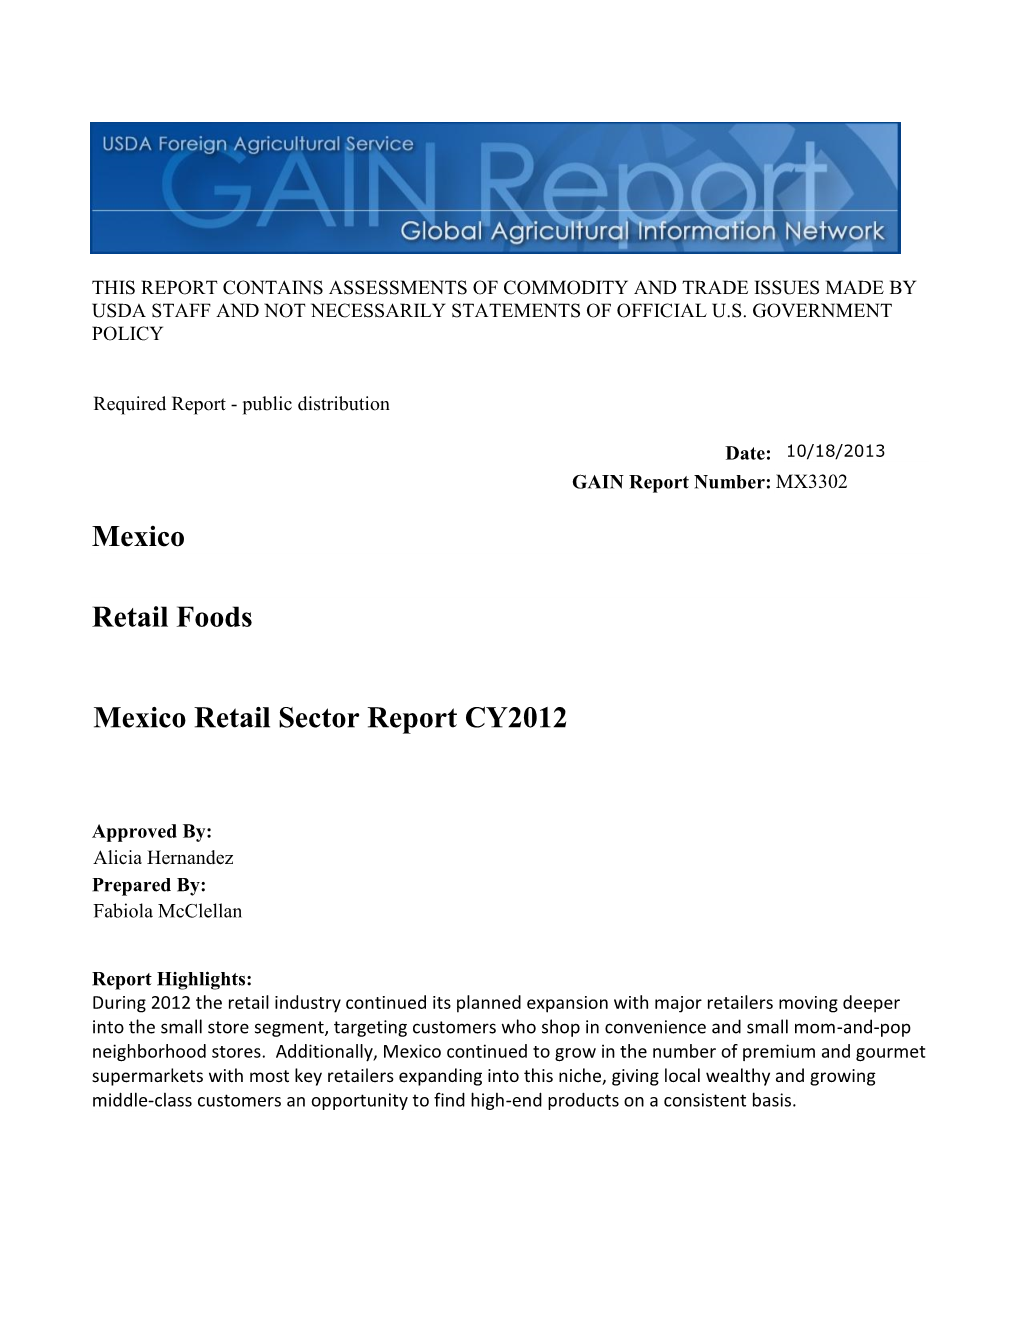 Mexico Retail Sector Report CY2012 Retail Foods Mexico